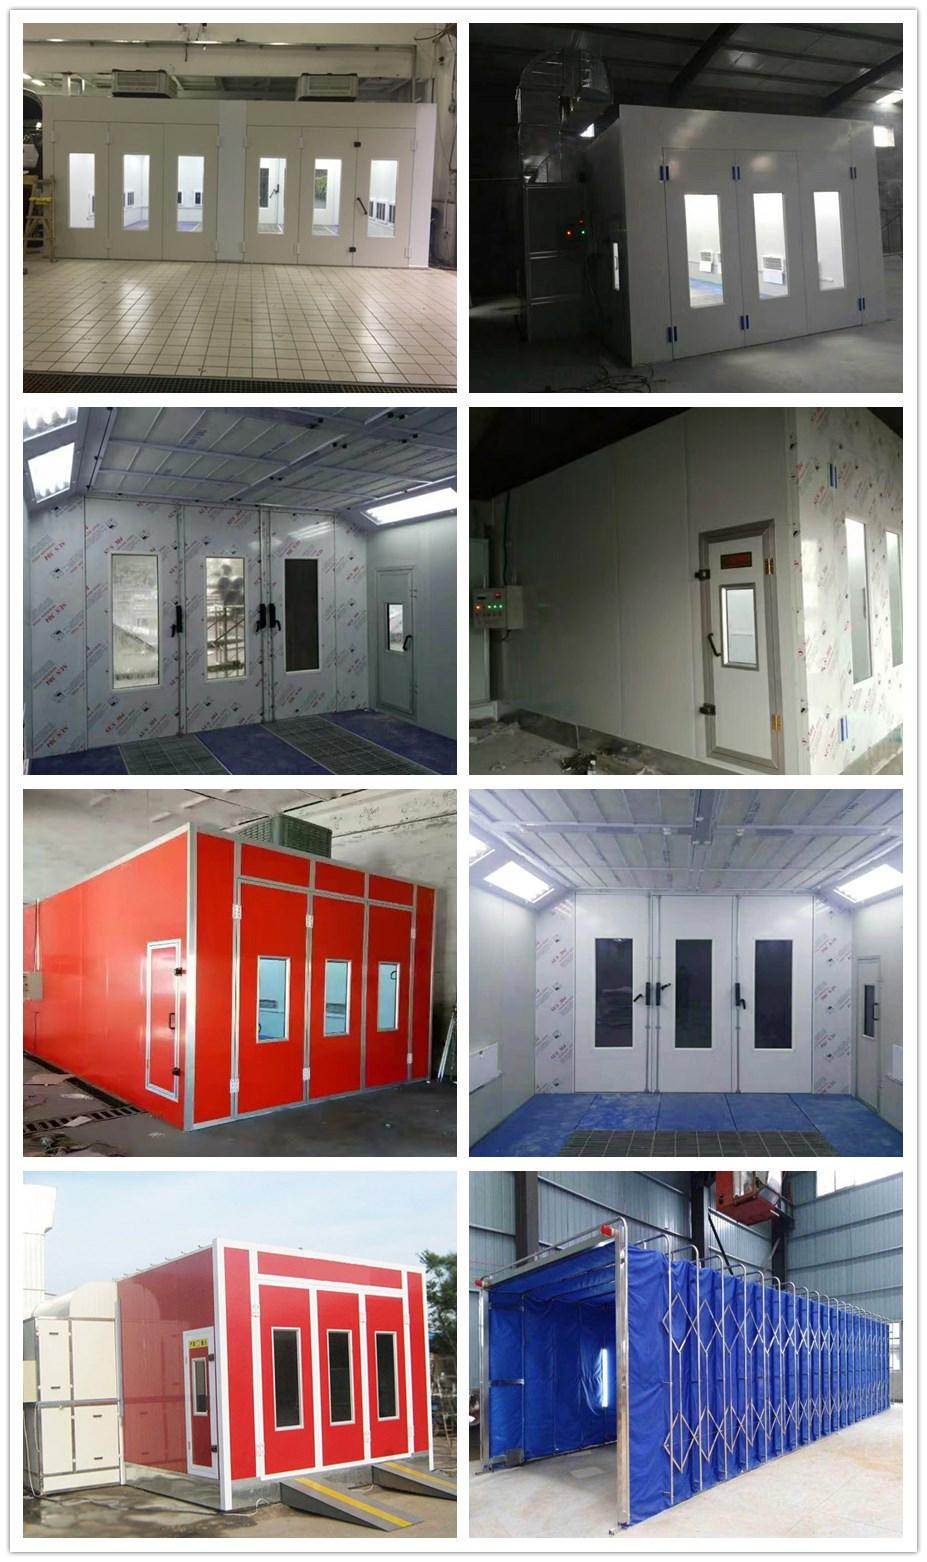 China Good Price Spray Paint Booth Car Painting Room with Filter